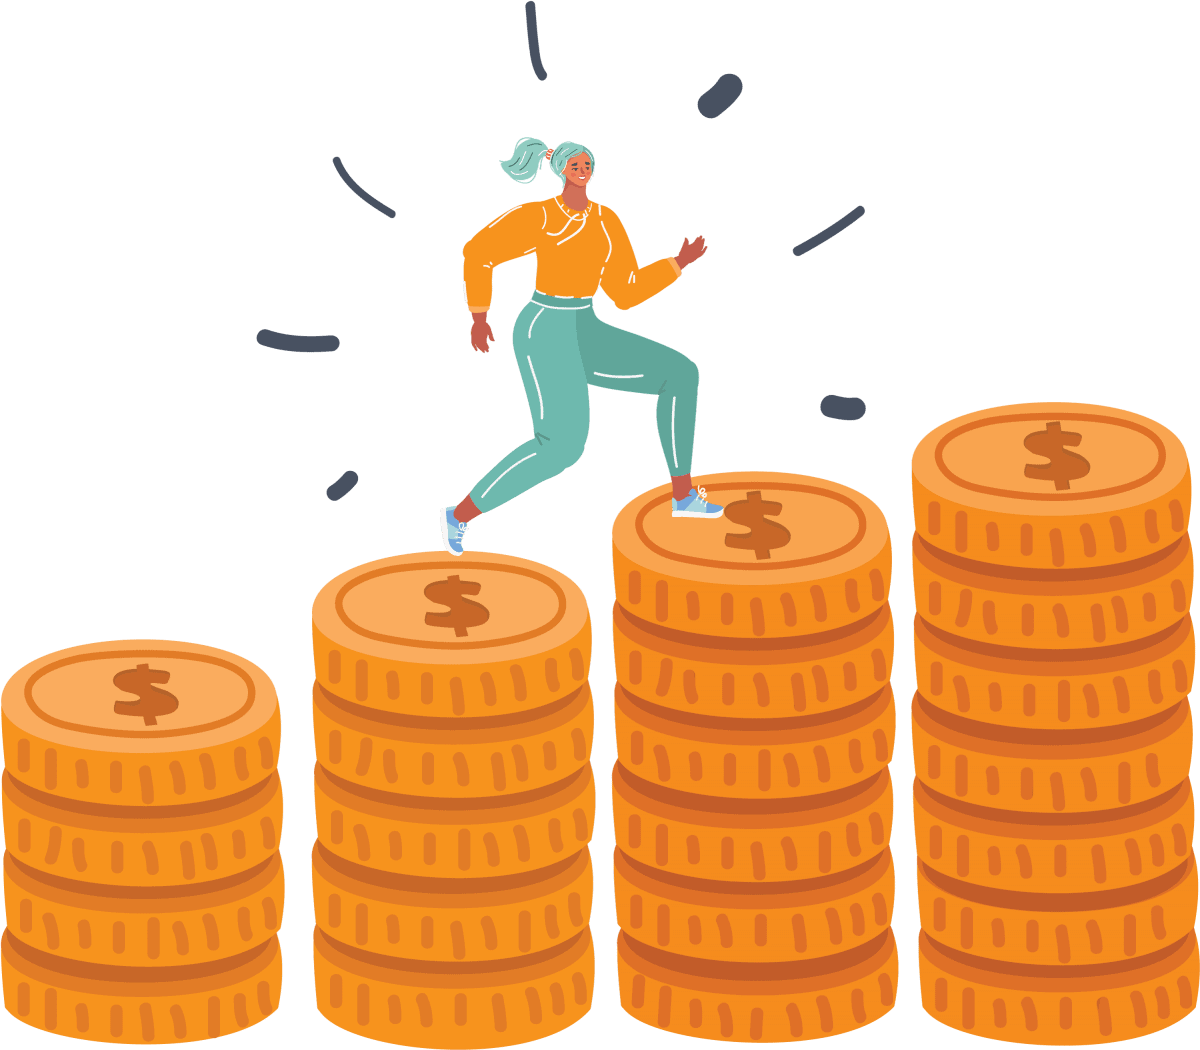 Woman running up stack of coins